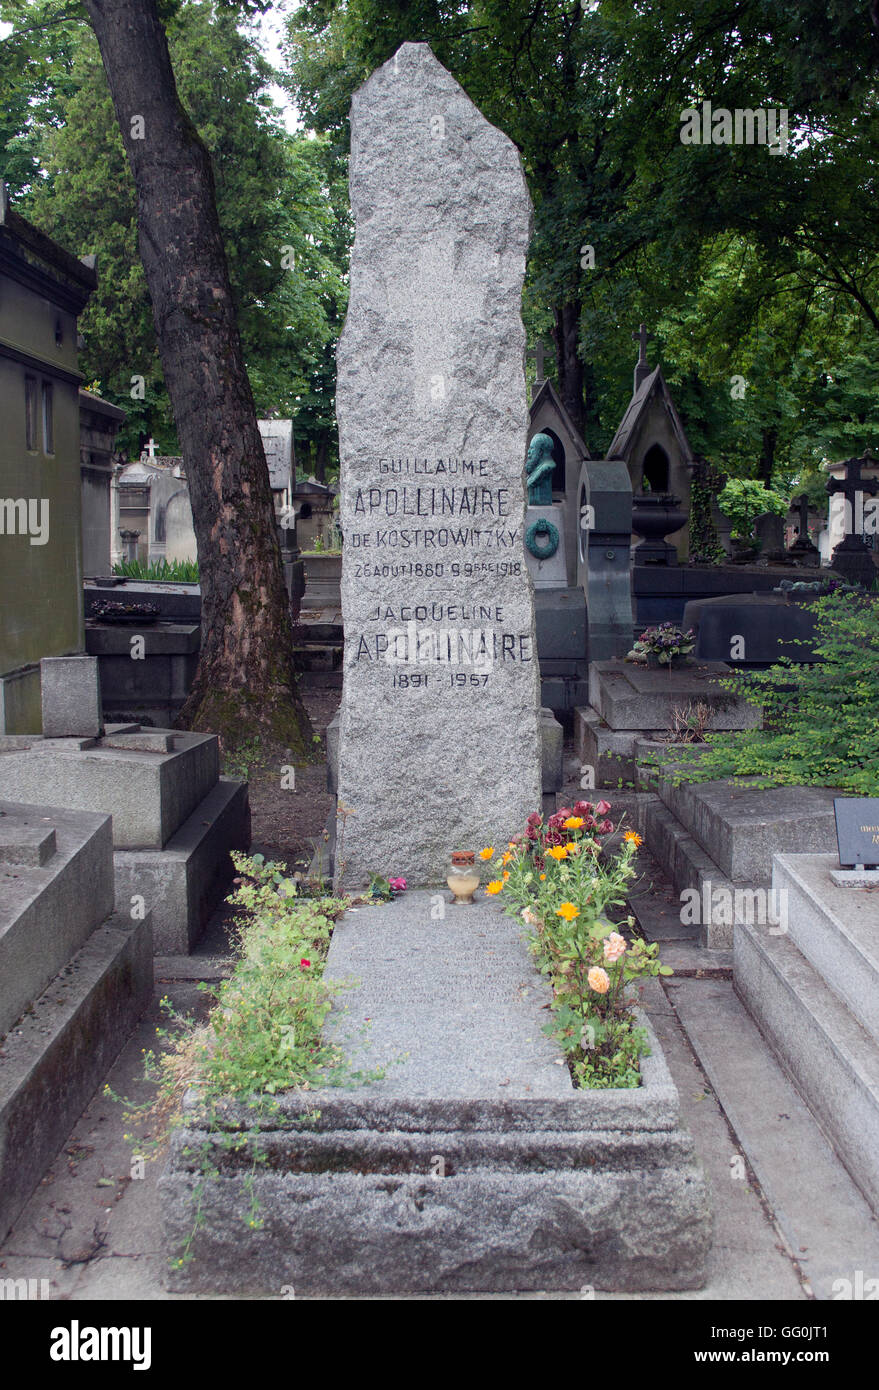 Guillaume Apollinaire grave at Pere Lachaise Cemetery in Paris France Stock Photo